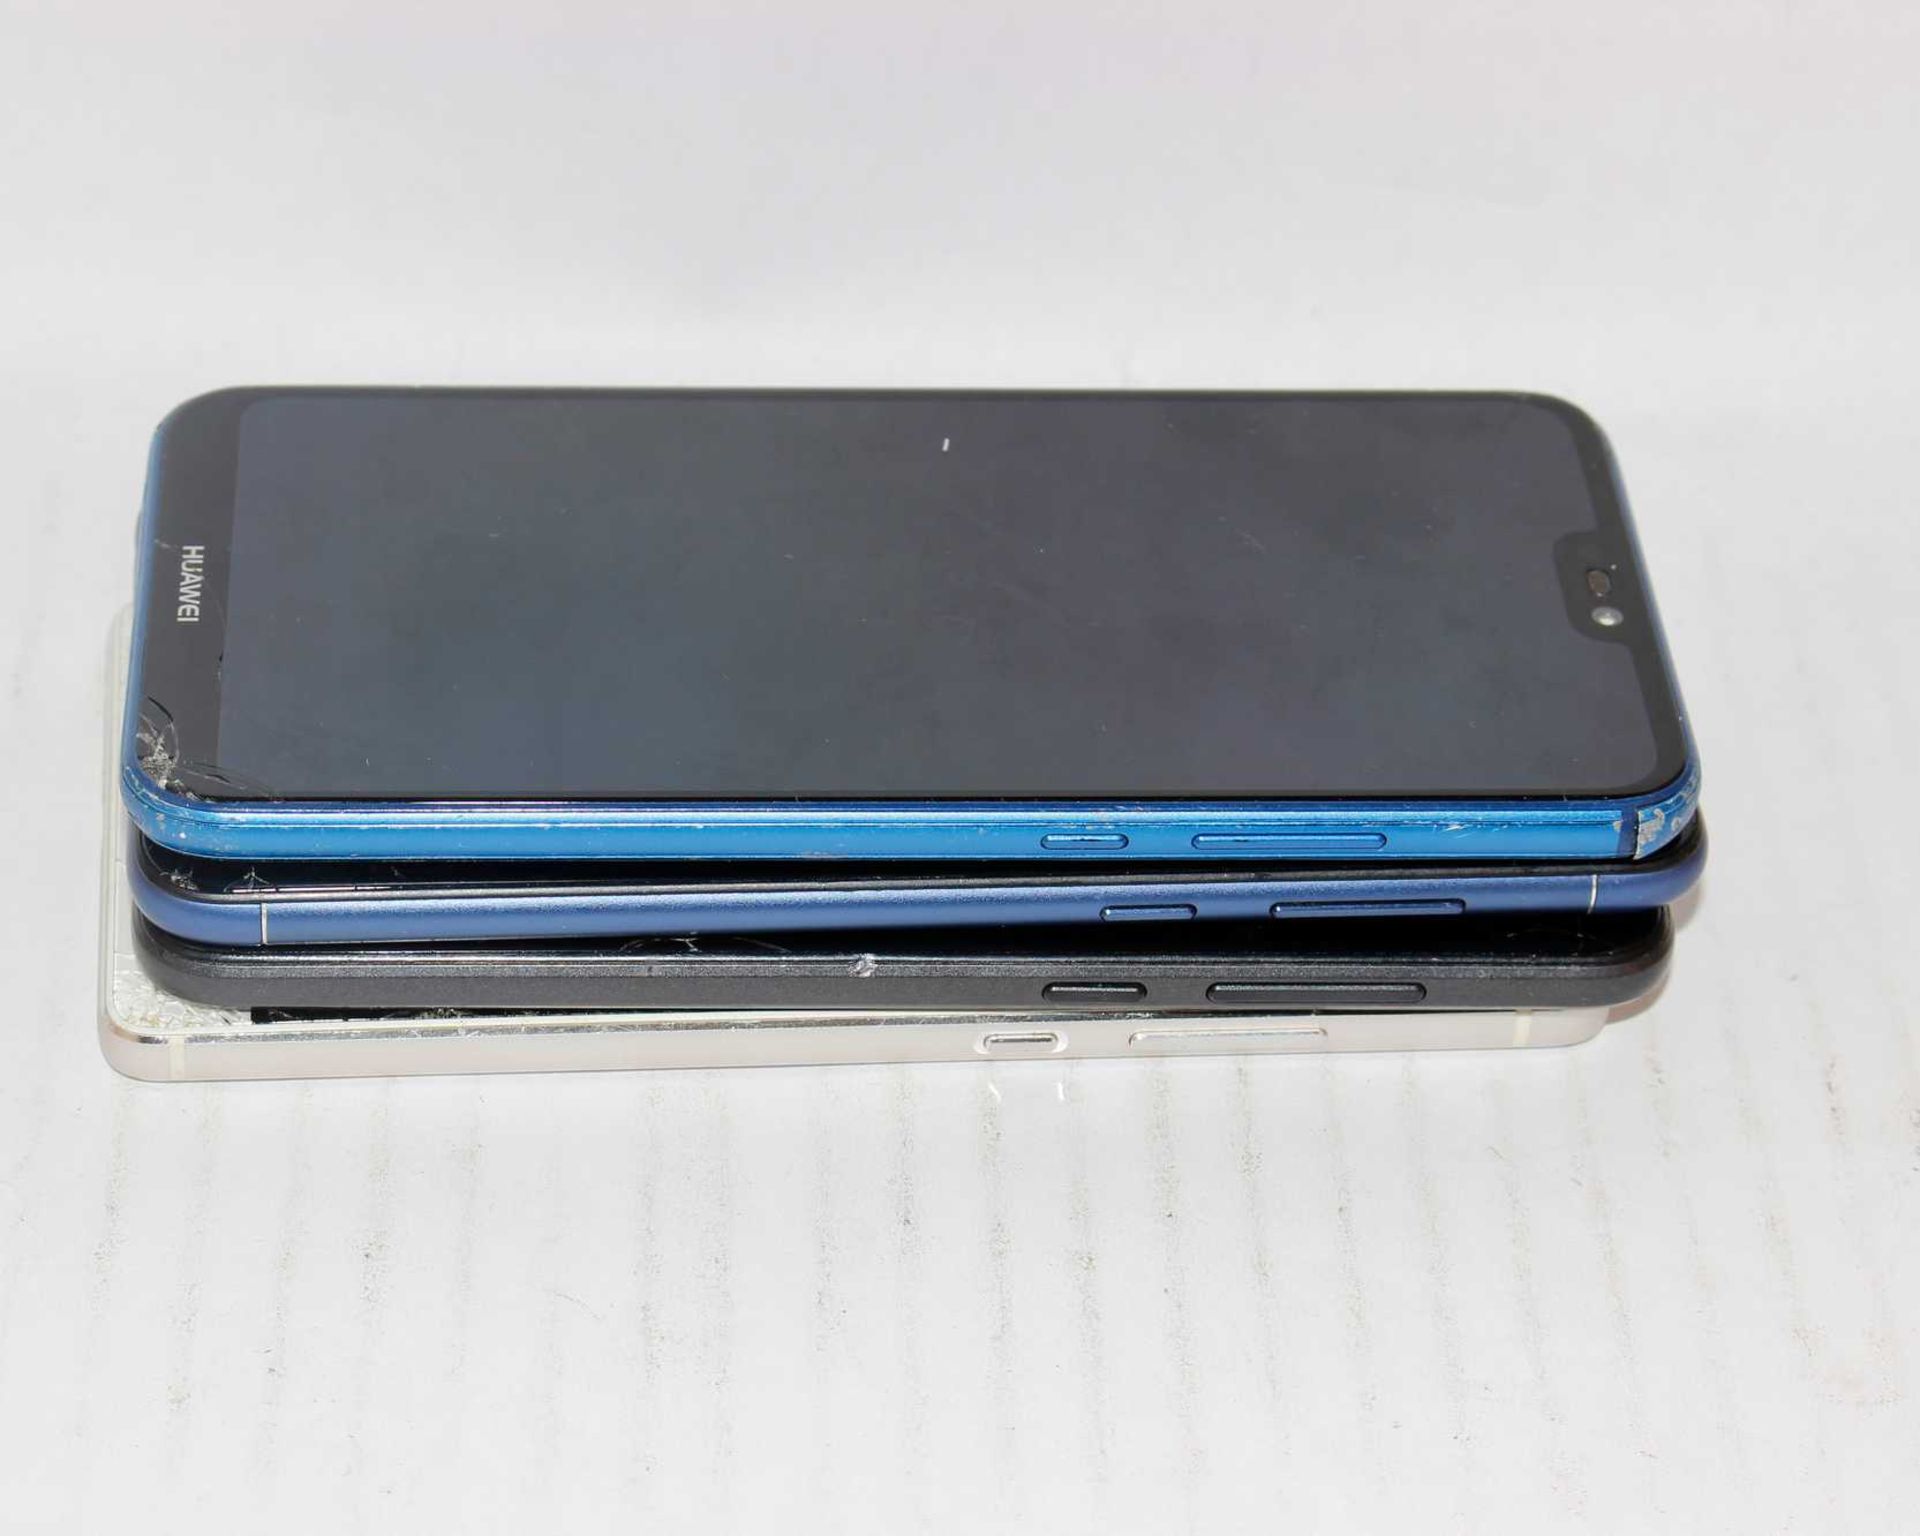 Four pre-owned Huawei smartphones sold for parts; a Huawei P20 Lite ANE-LX1 (damaged rear casing